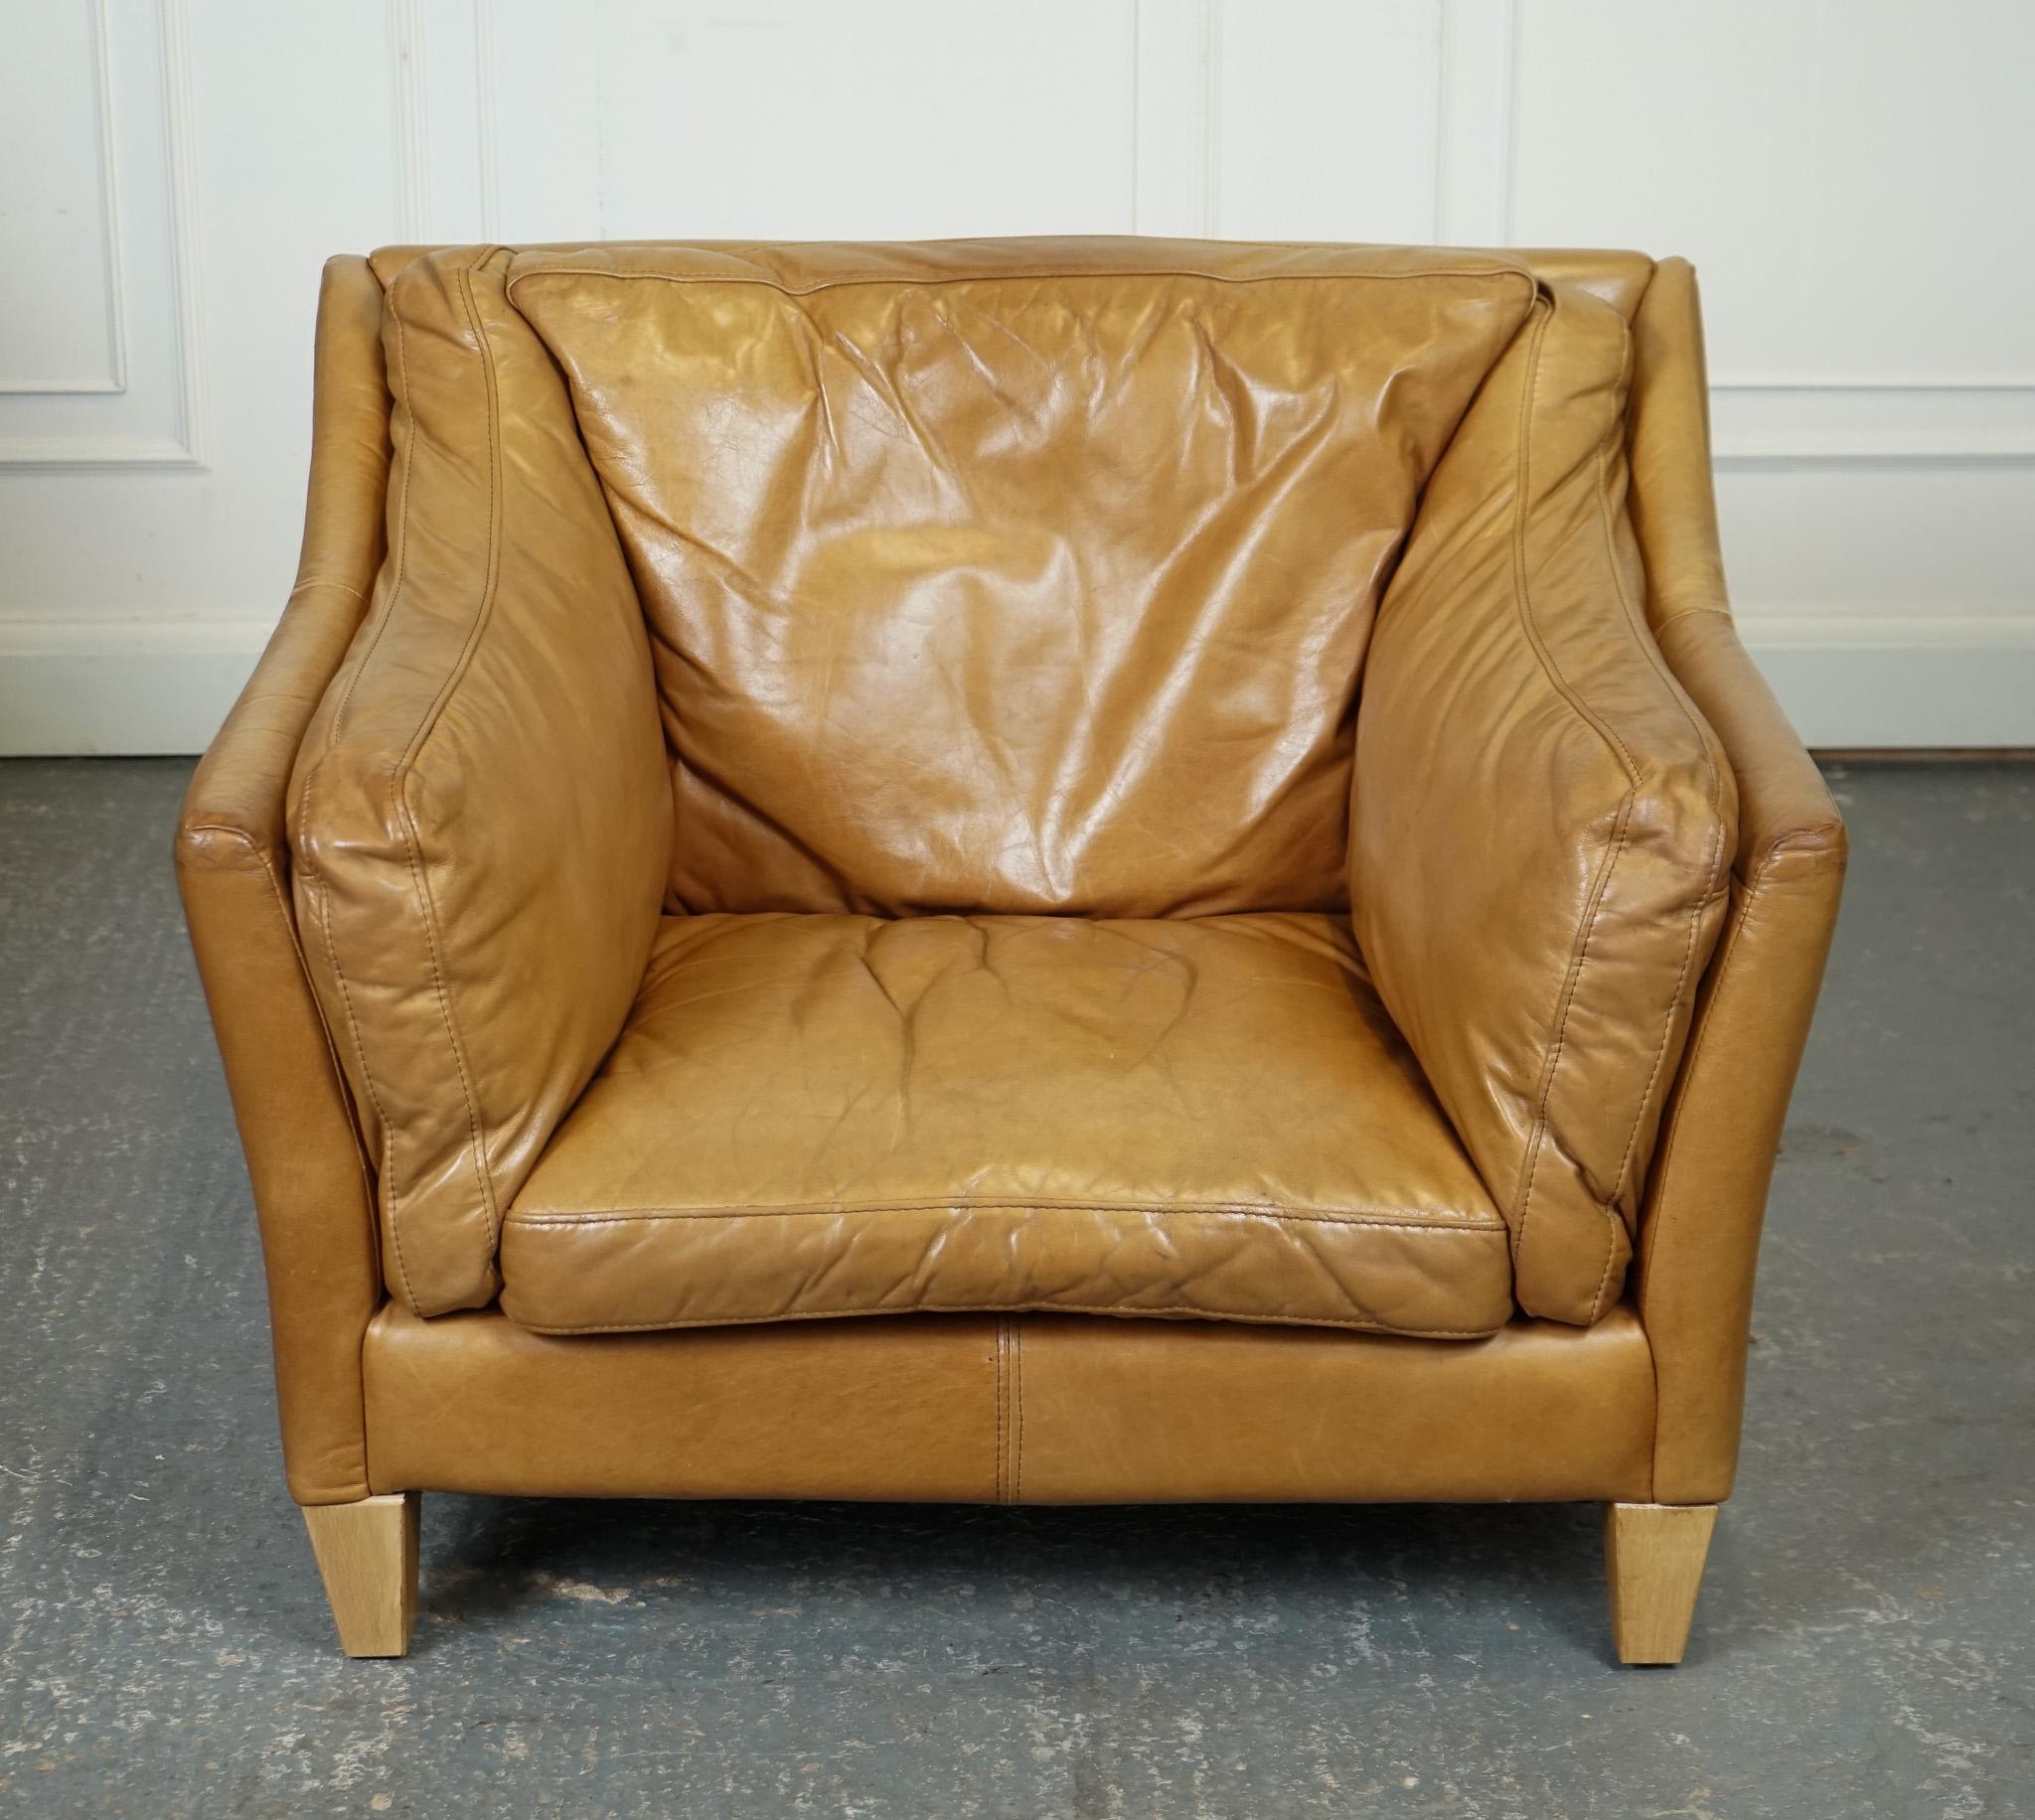 COMPACT AND VERY COMFORTABLE HALO REGGIO Tan LEATHER ARMCHAiR (Britisch) im Angebot